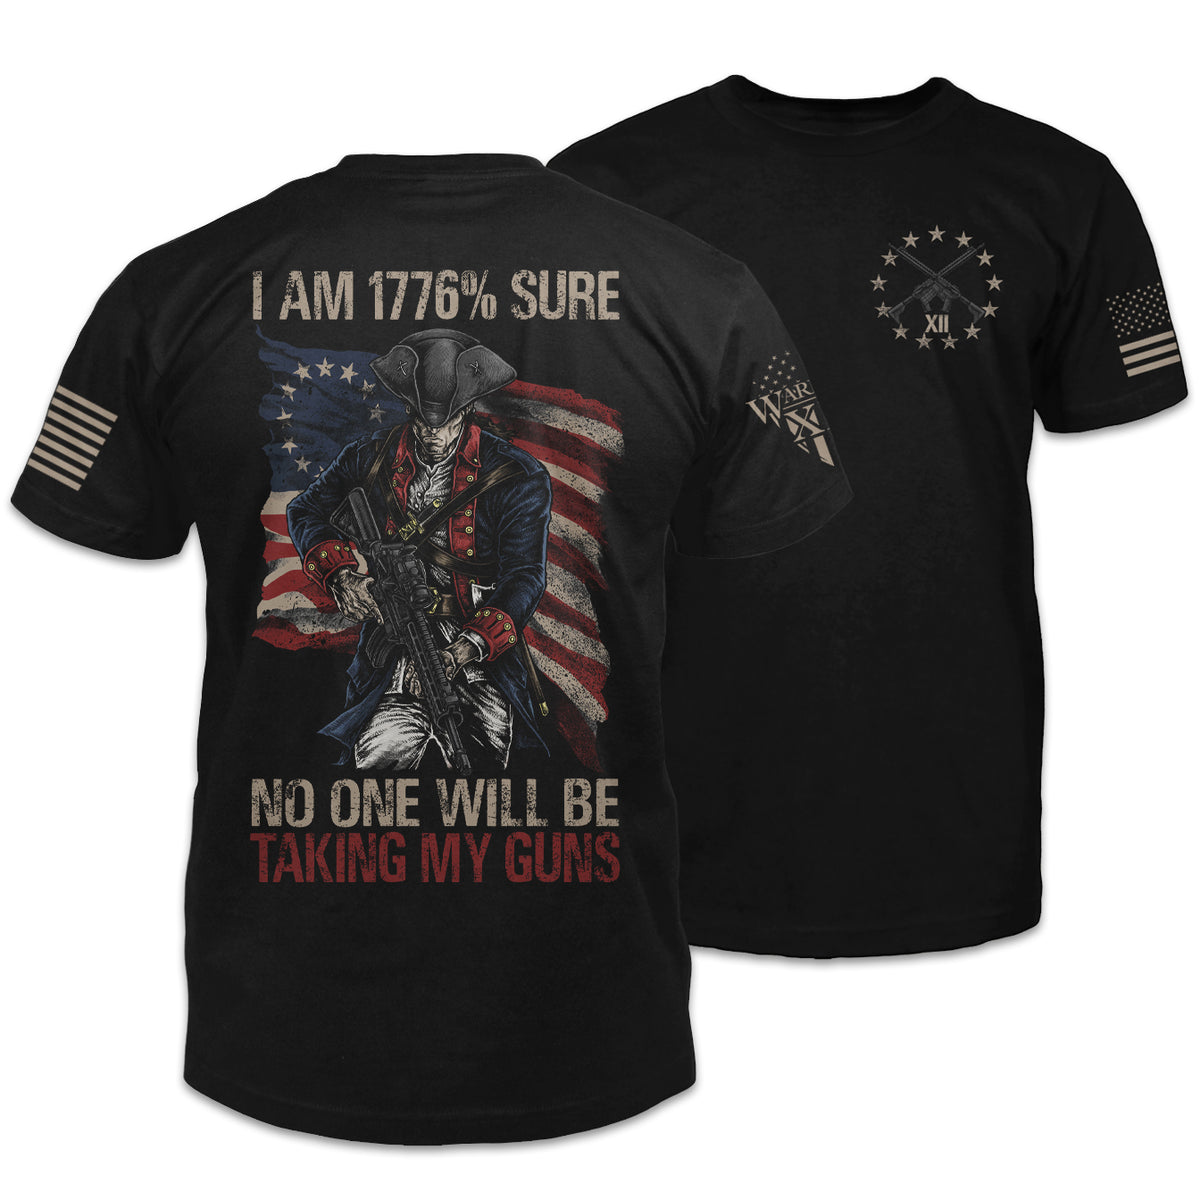 Front & back black t-shirt with the main design, "I Am 1776% Sure No One Will Be Taking My Guns" printed on the back.